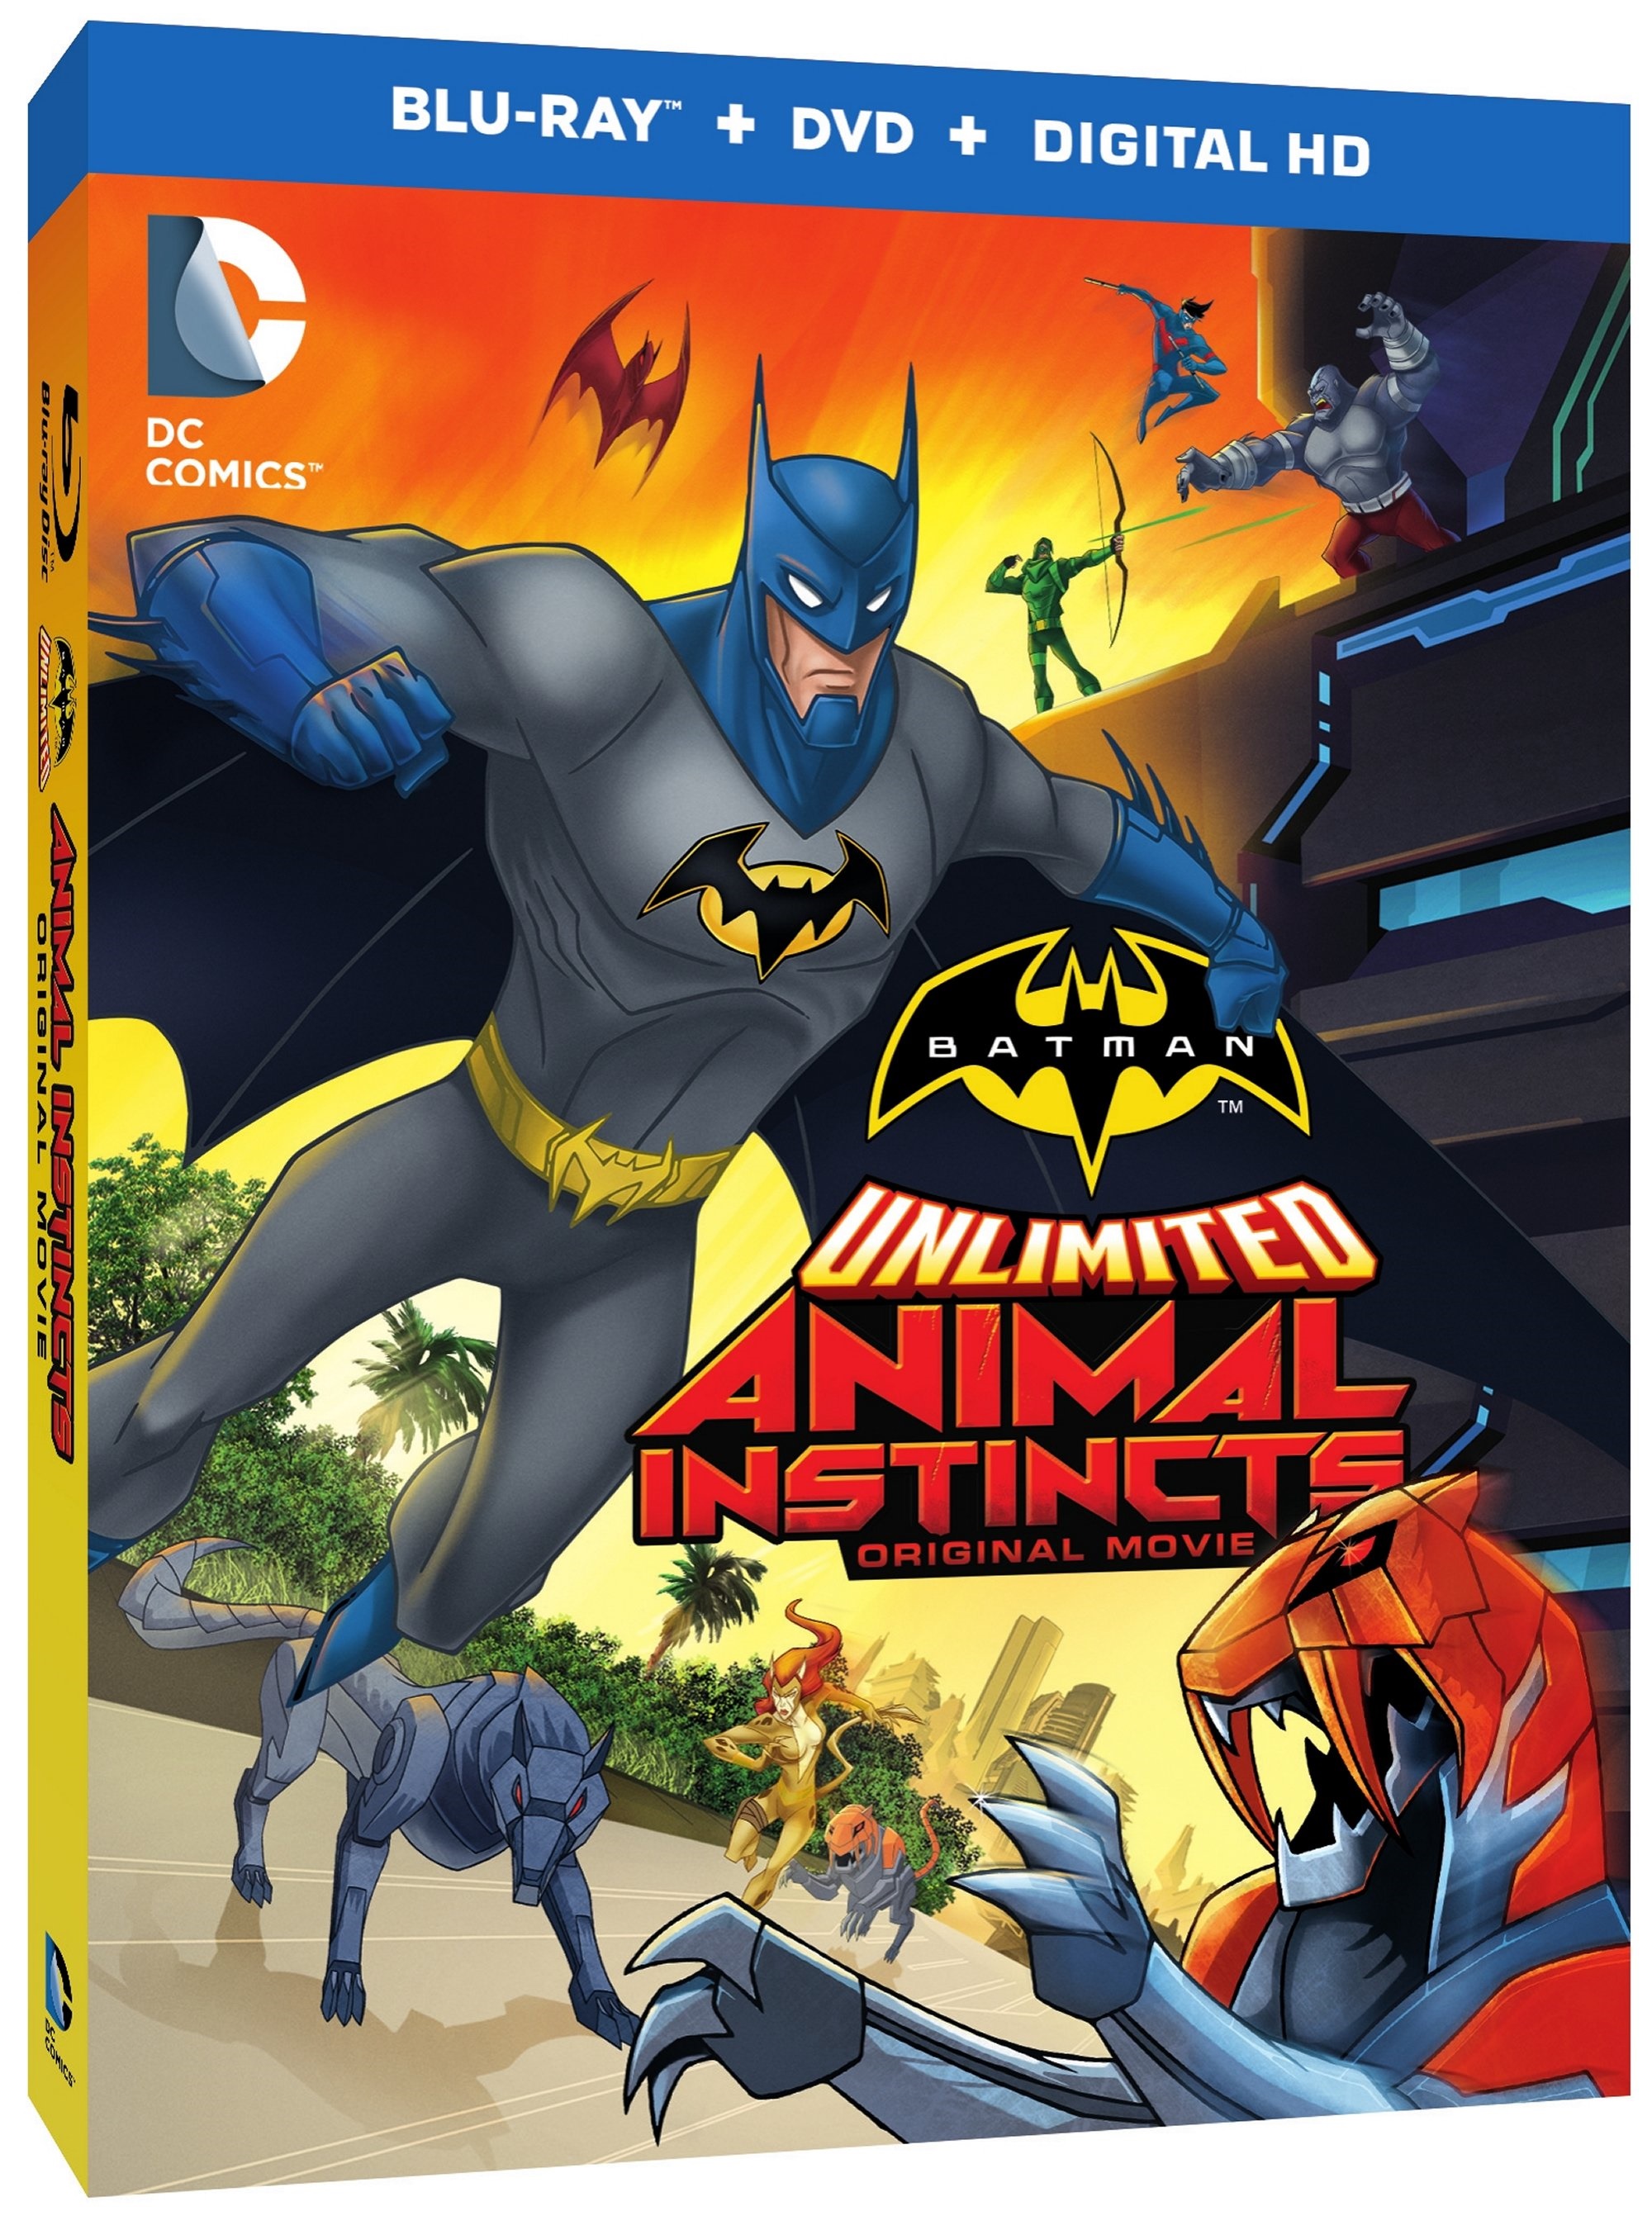 Batman Unlimited: Animal Instincts Blu-ray Review